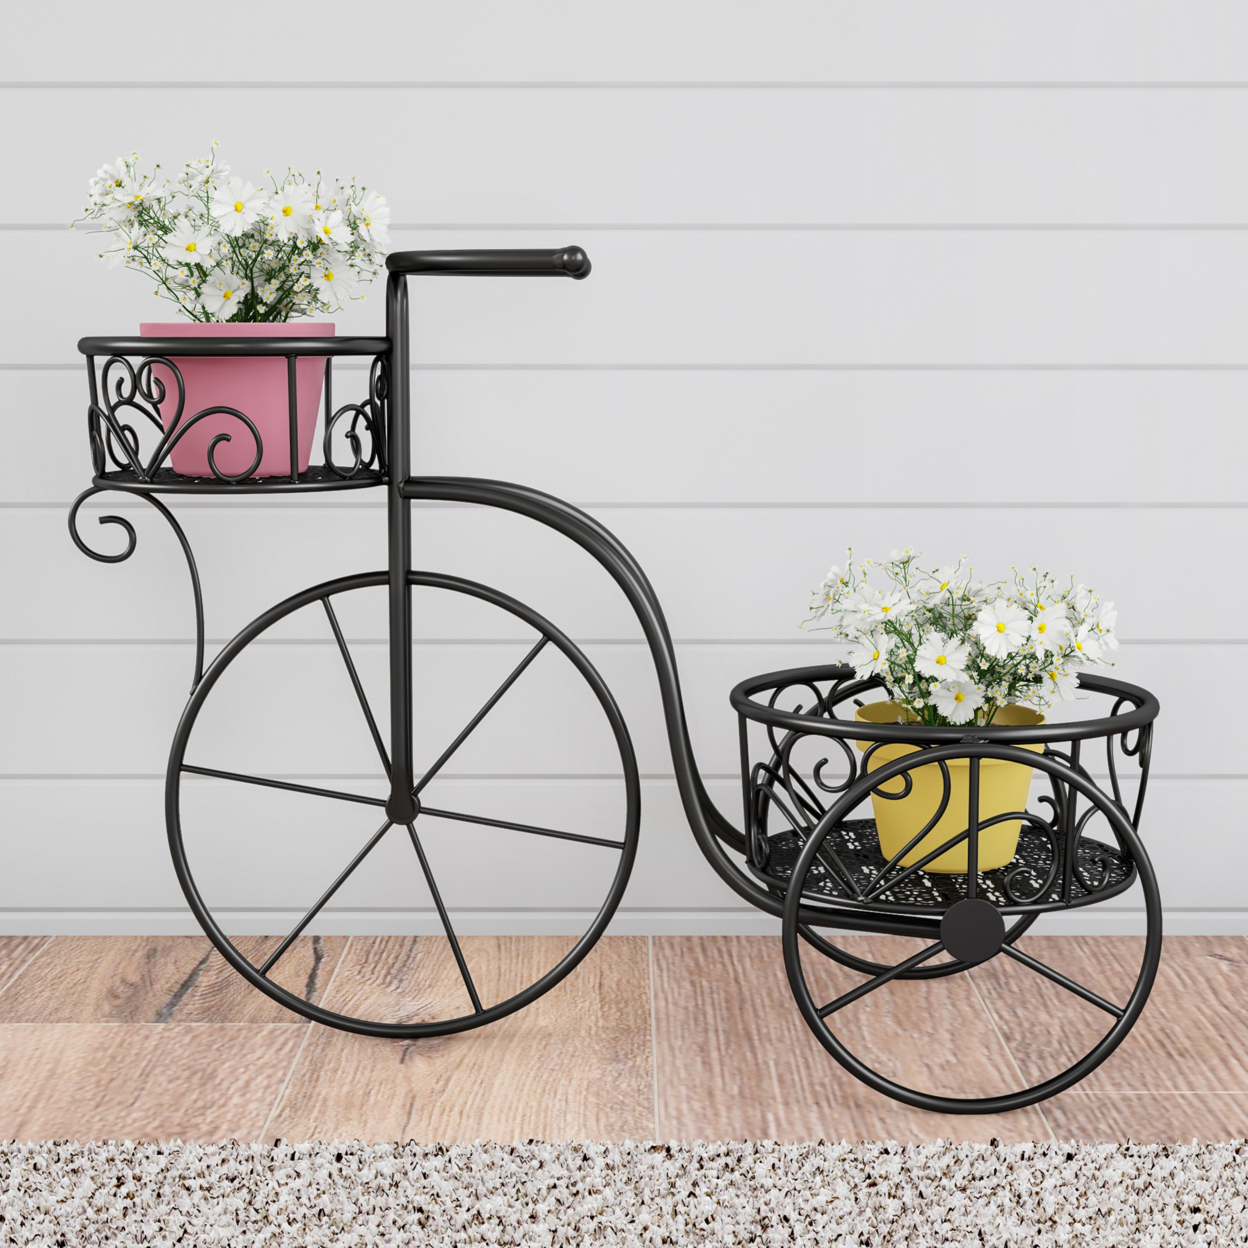 Tricycle Plant Stand 2-Tiered Indoor Or Outdoor Decorative Vintage-Look Metal Display For Patio